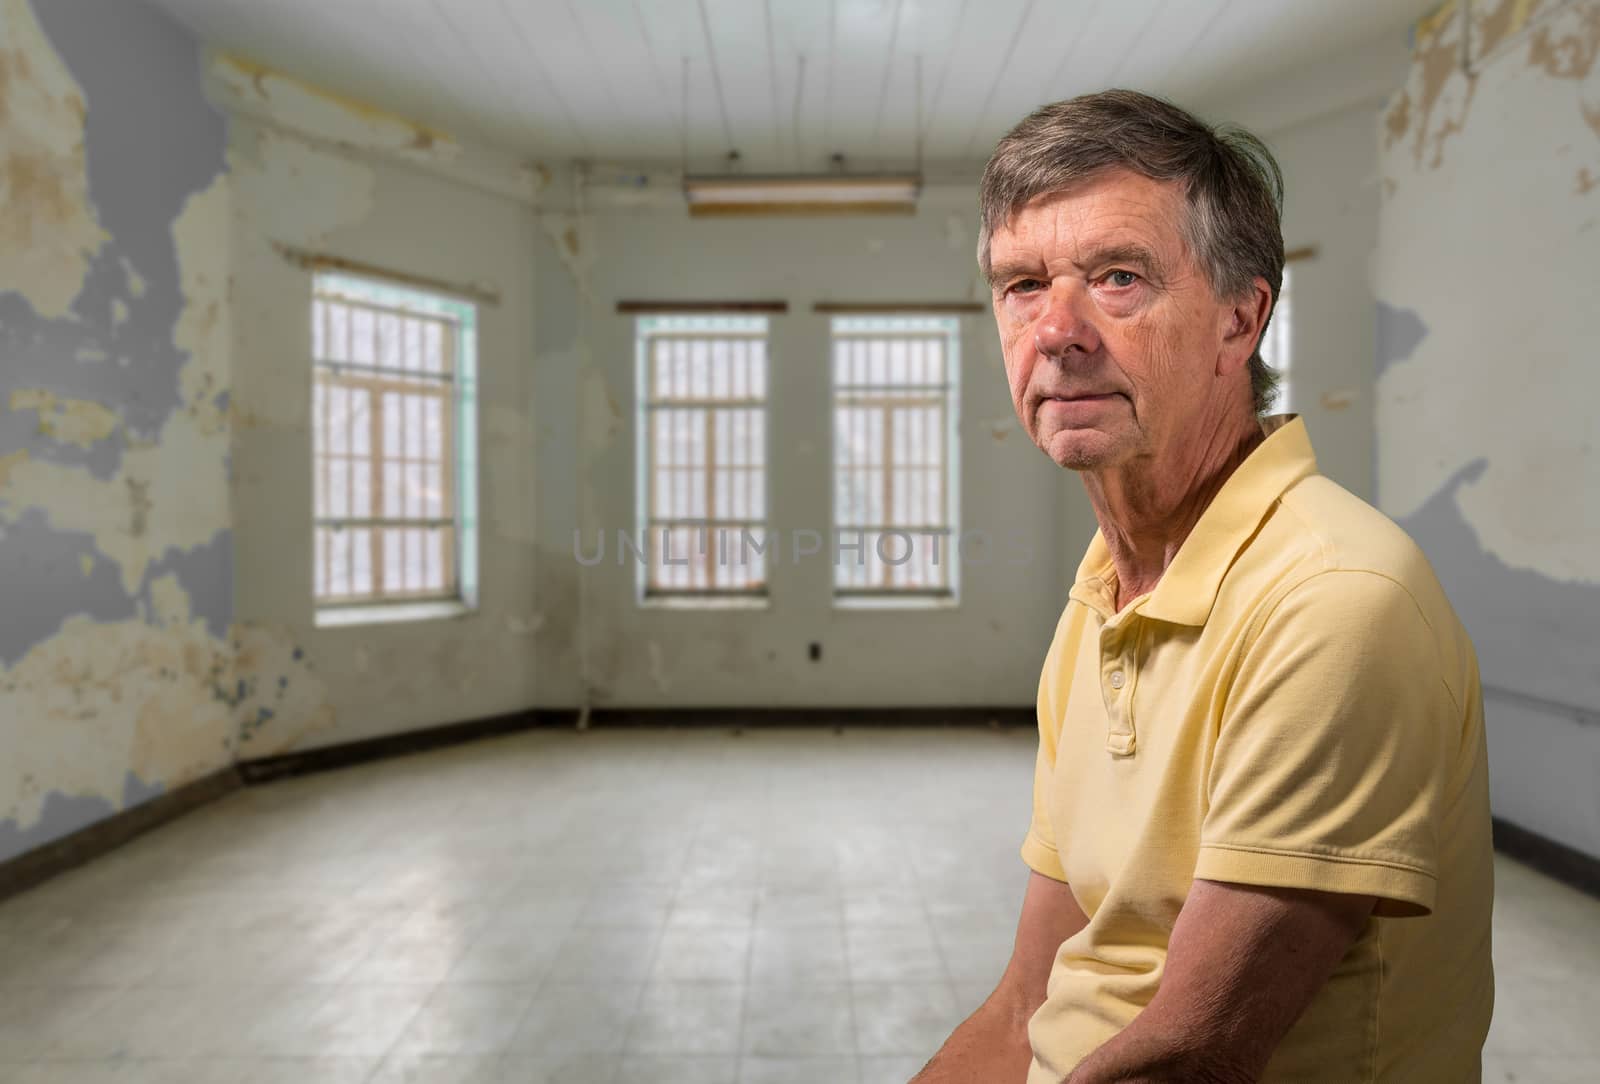 Senior old man looking at camera with a background of an old tenement apartment with peeling paint on walls